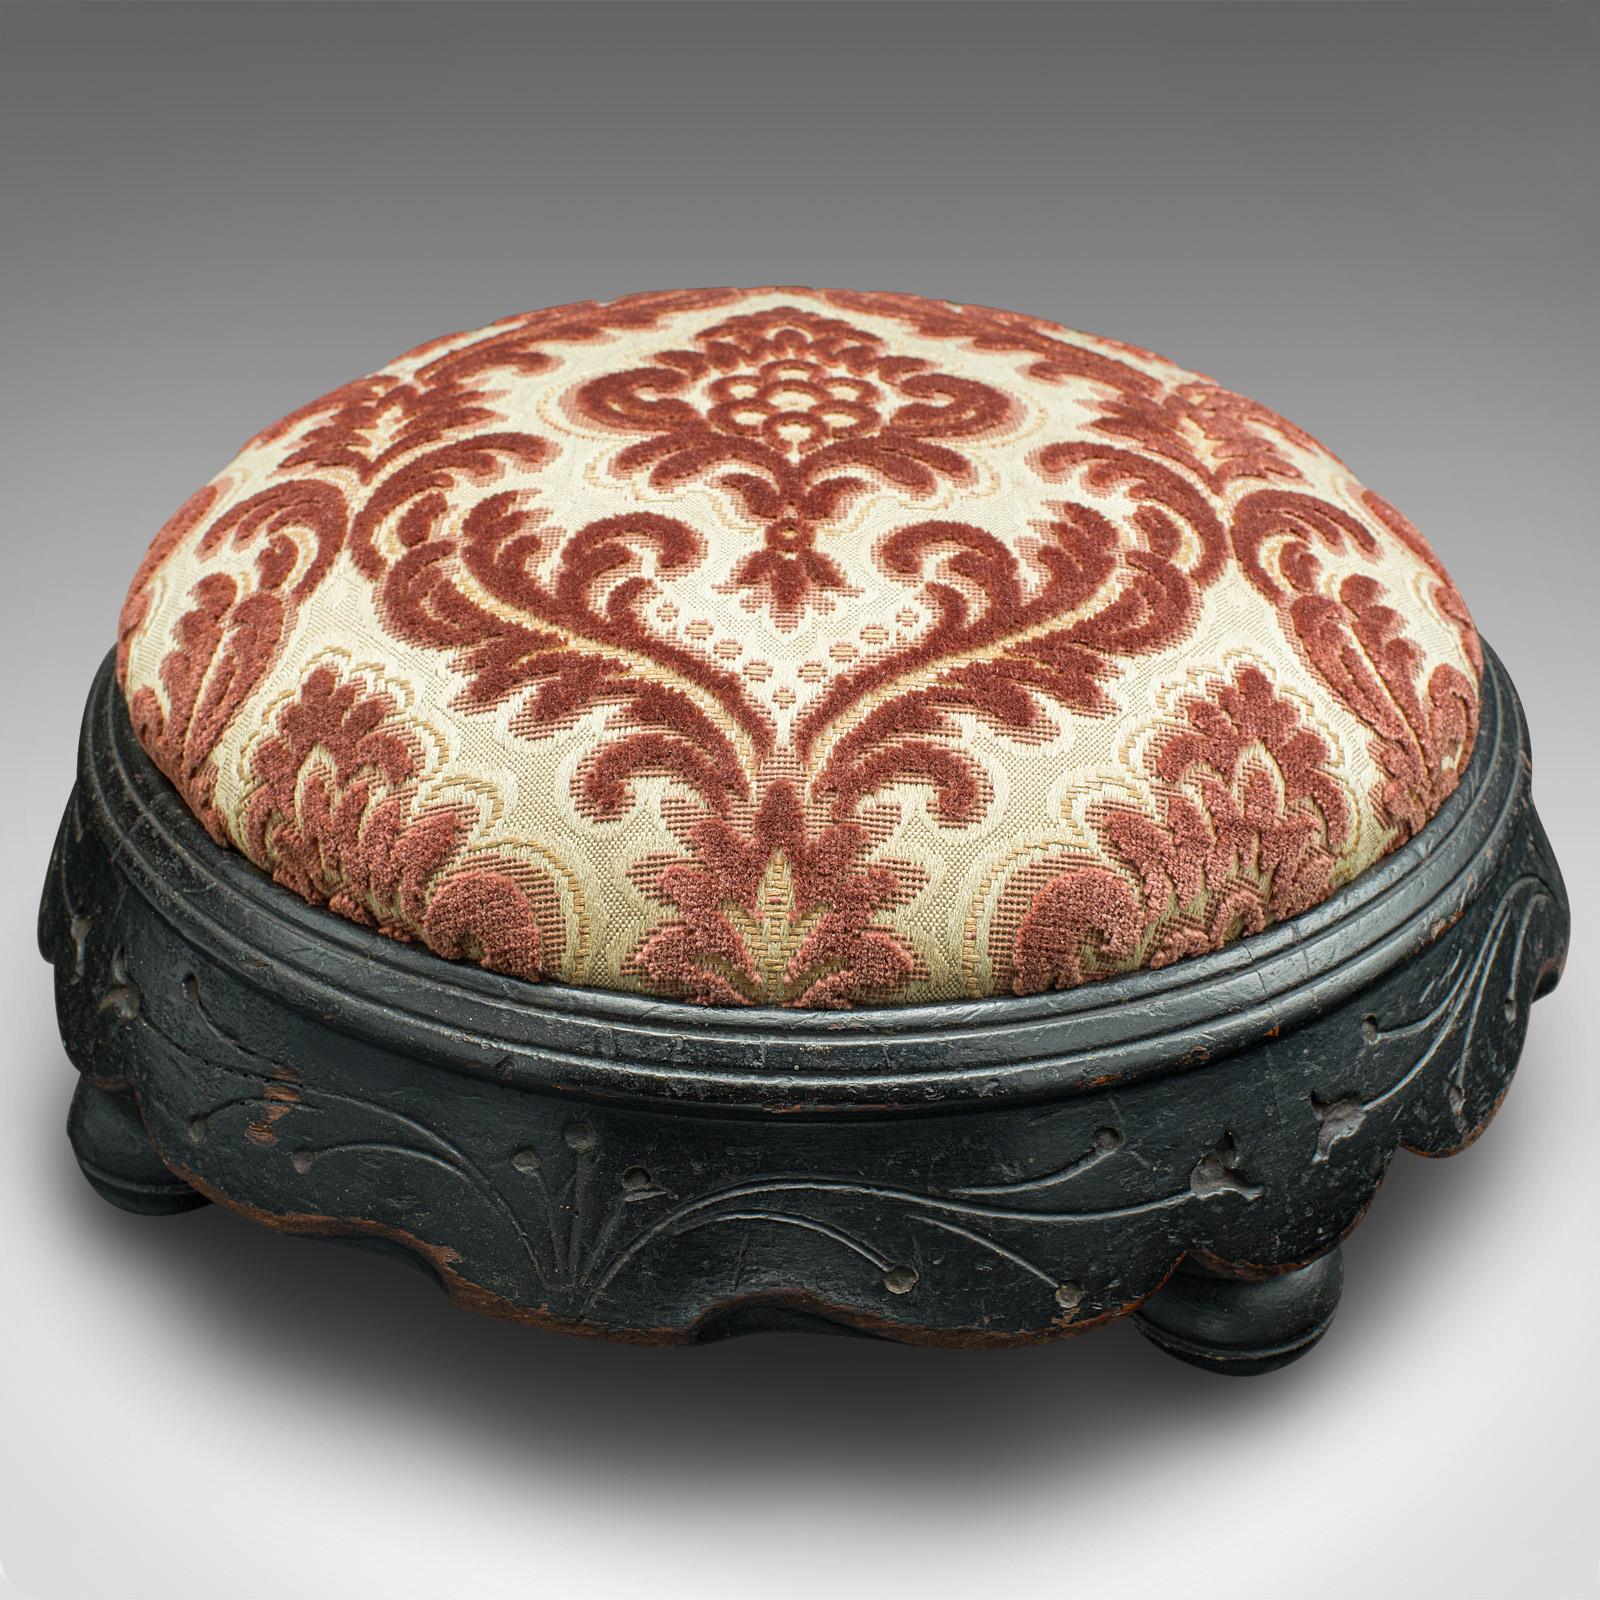 This is an antique cushioned stool. An English, ebonised mahogany footstool with Art Nouveau taste, dating to the late Victorian period, circa 1895.

Striking ebonised appearance with wonderfully padded cushion
Displays a desirable aged patina